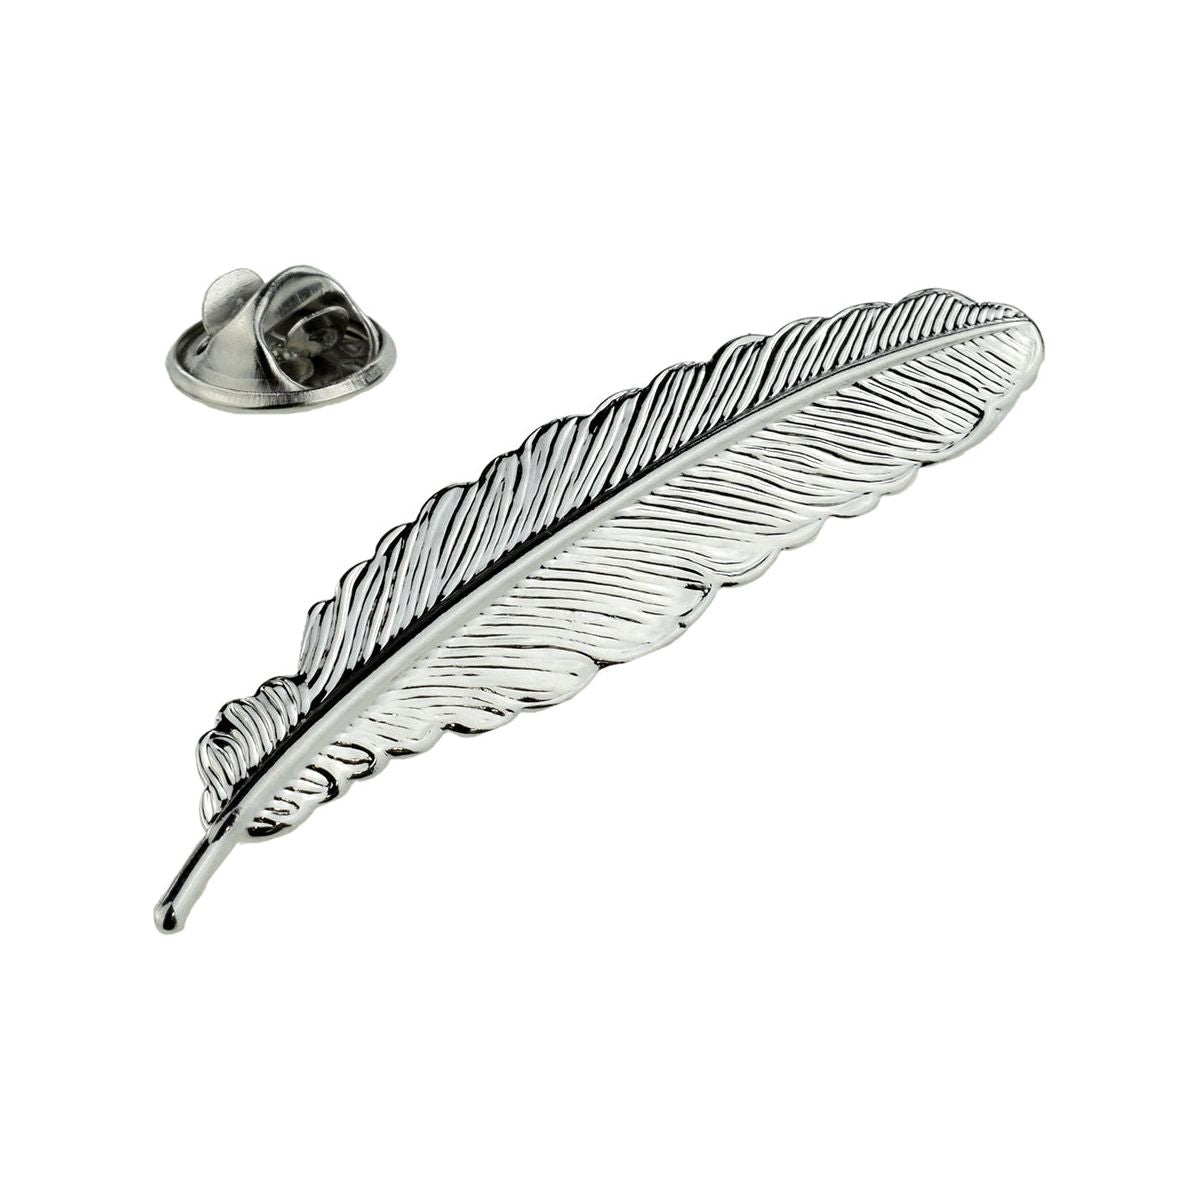 Quill Feather Design Lapel Pin Badge - Ashton and Finch